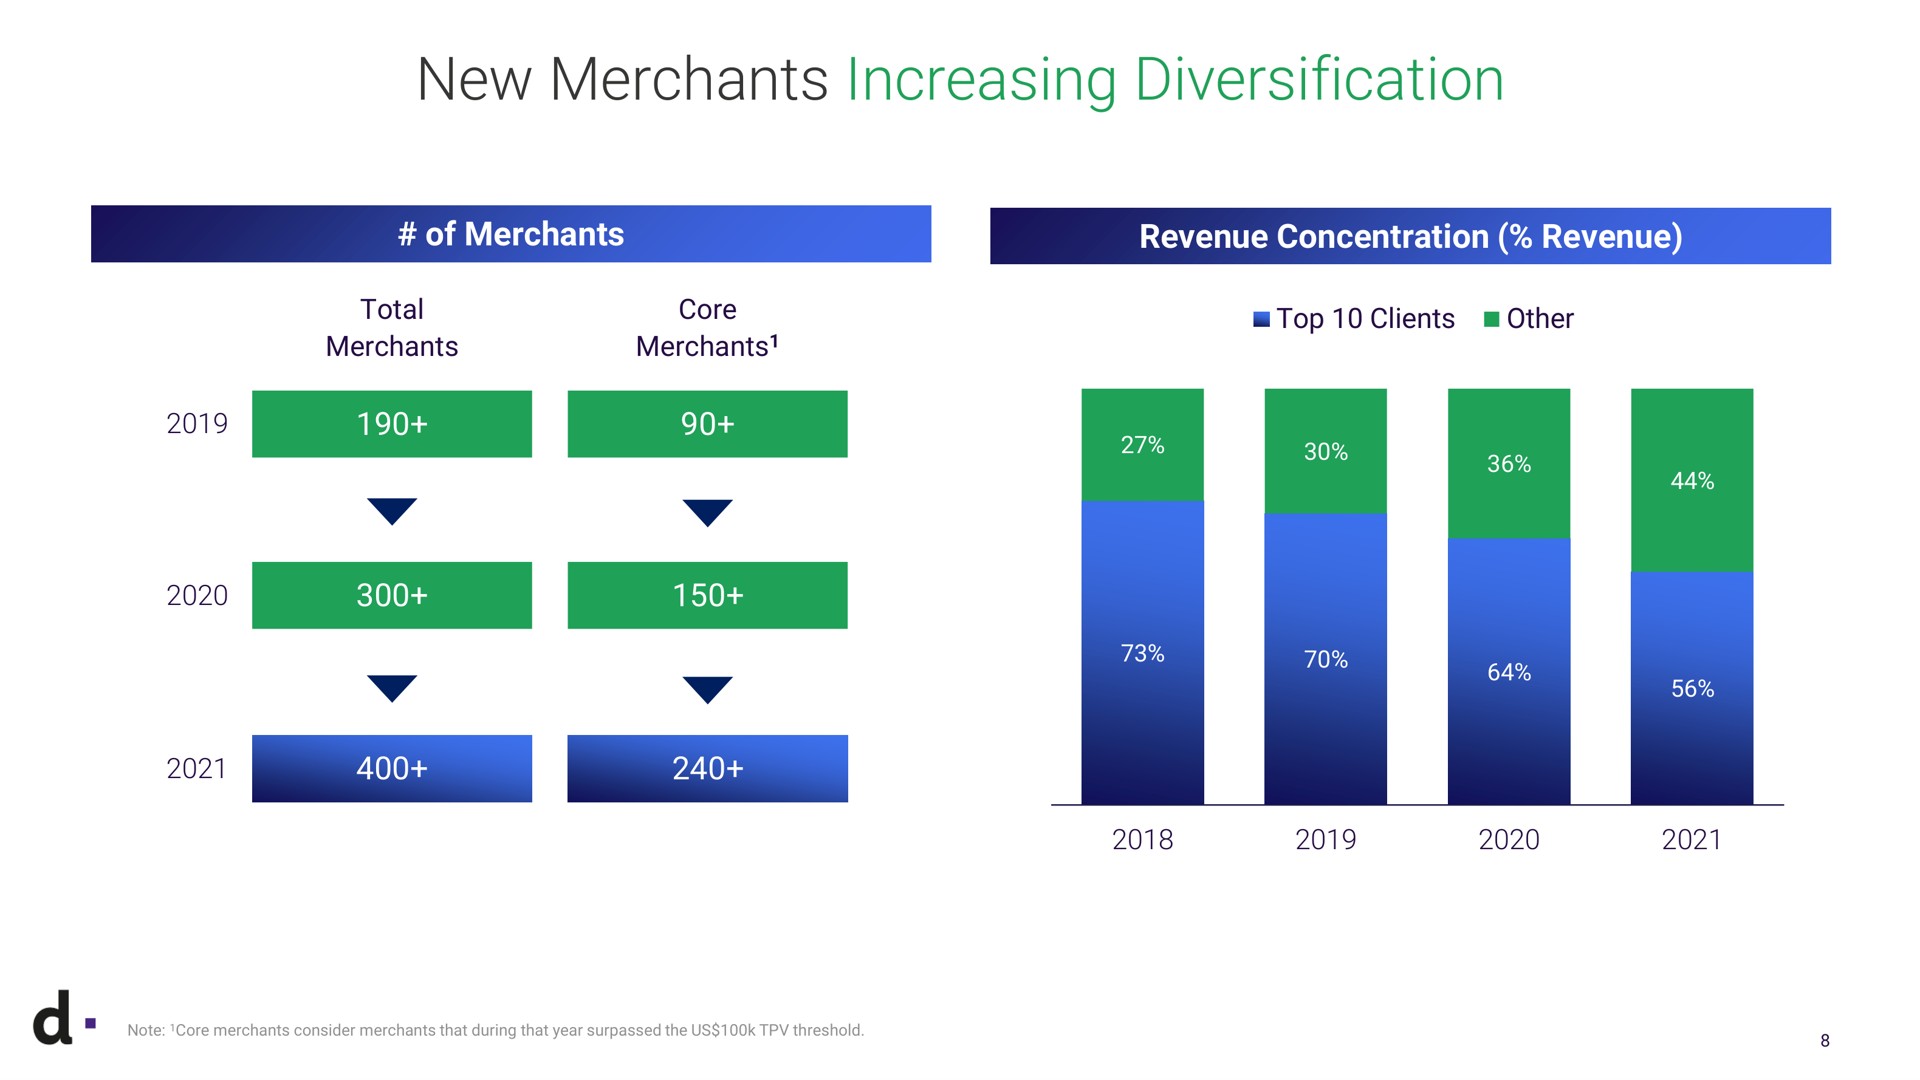 new merchants increasing diversification of revenue concentration revenue total core clients other a note core consider that during that year surpassed the us threshold | dLocal